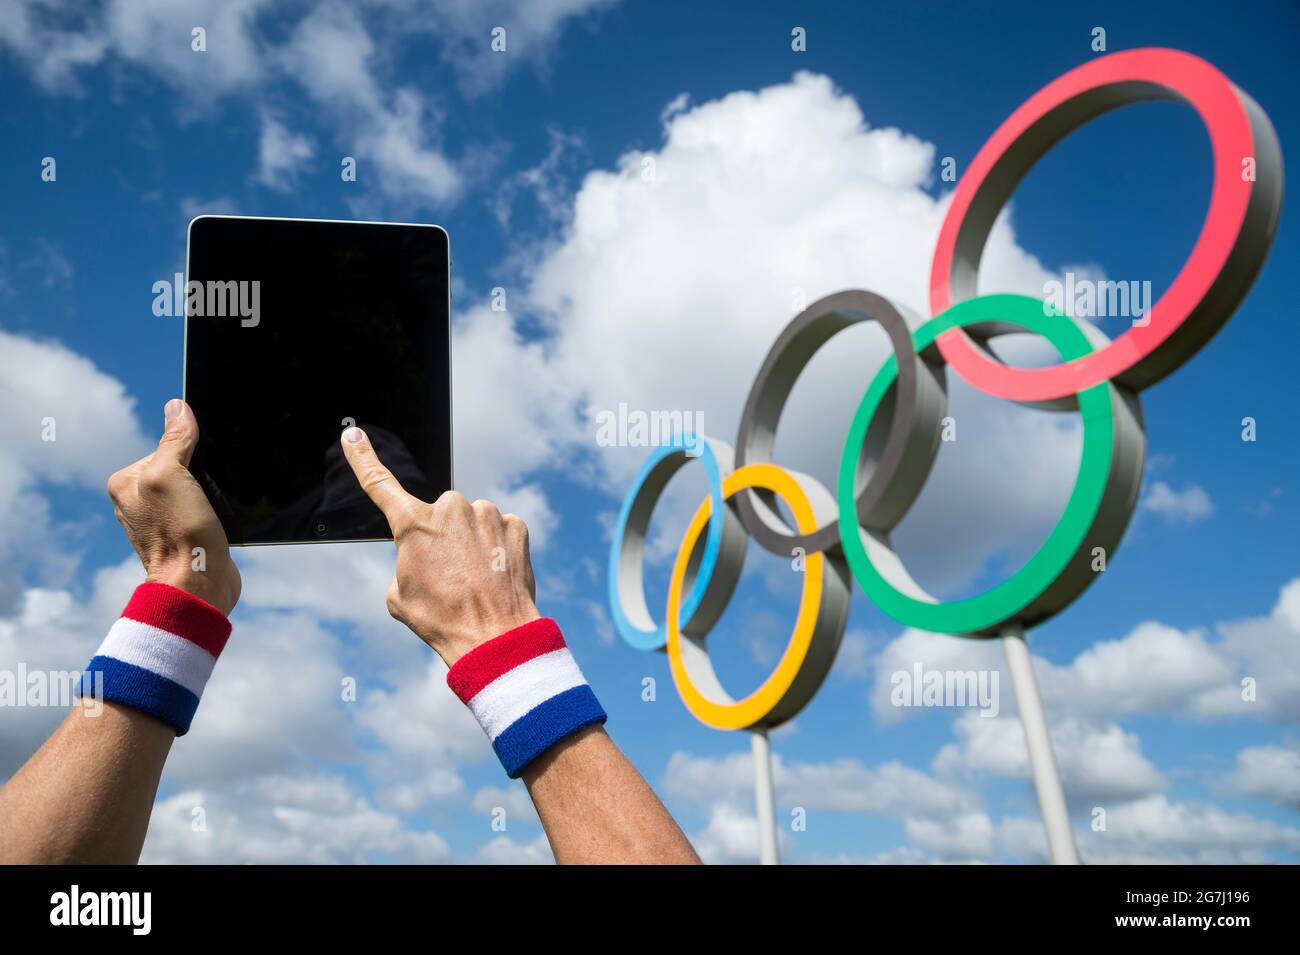 RIO DE JANEIRO - APRIL, 2016: Athlete wearing a red, white and blue wristband touching the screen of a tablet computer in front of Olympic Rings Stock Photo